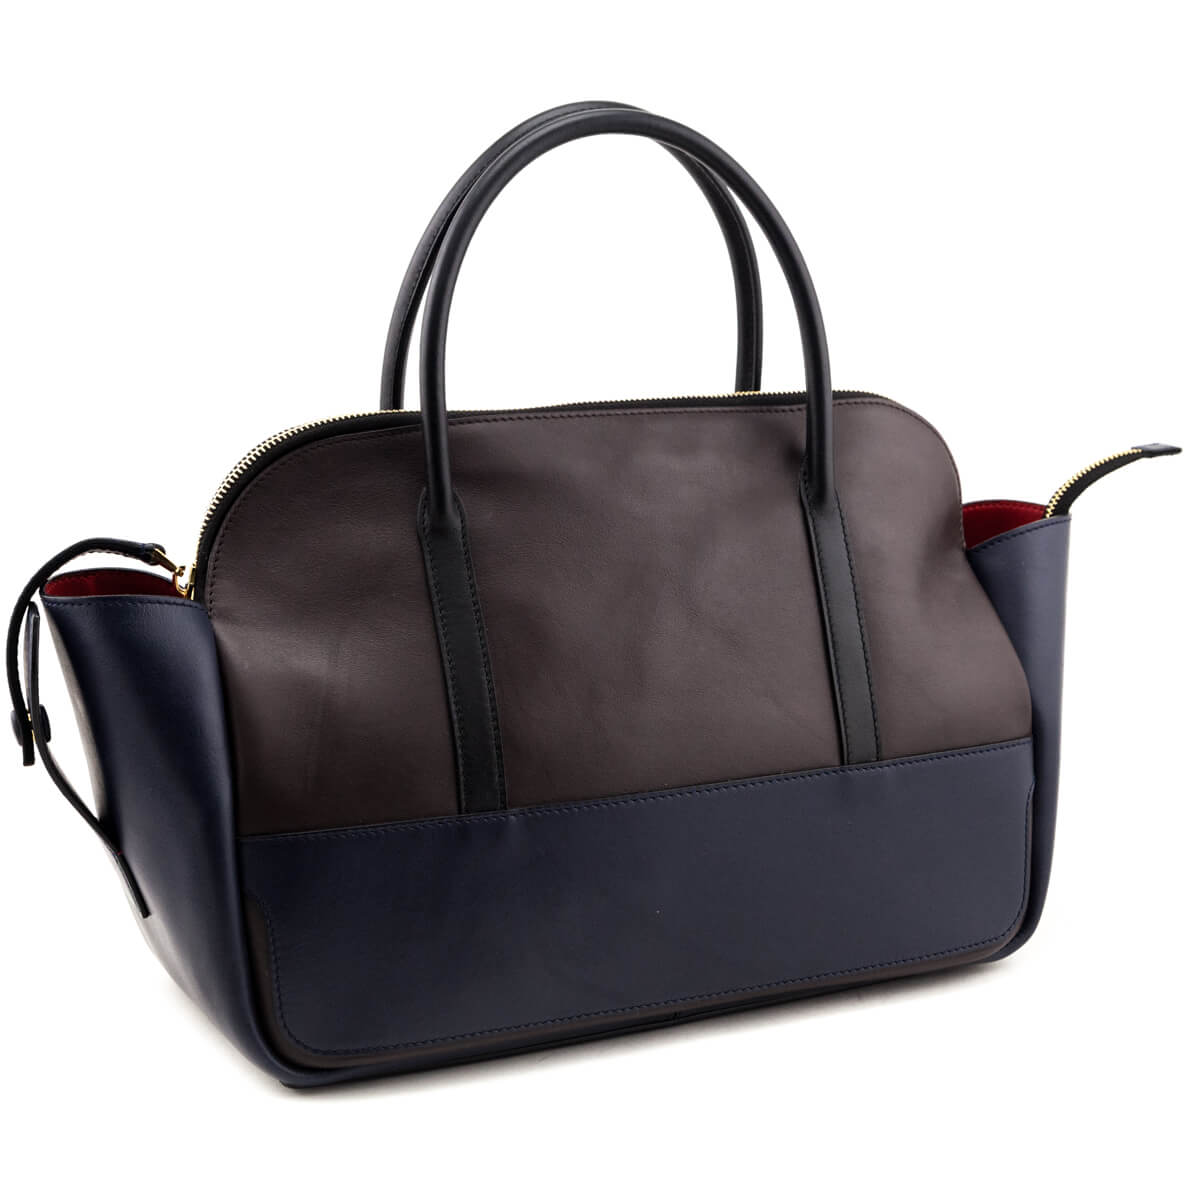 Marni Tri-Color Leather Handle Bag - Love that Bag etc - Preowned Authentic Designer Handbags & Preloved Fashions